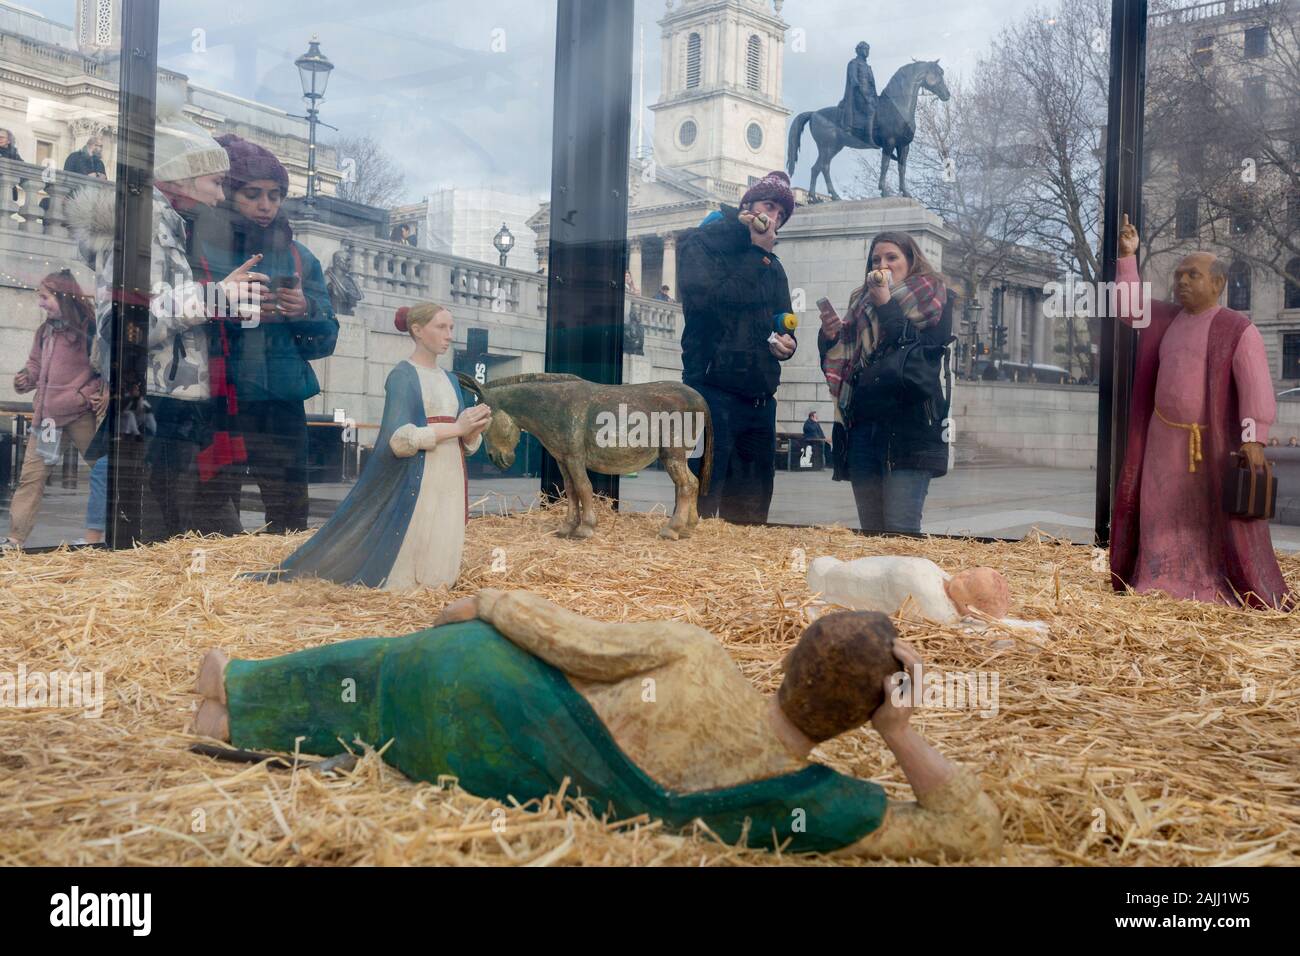 The annual Christmas nativity scene entitled 'Christmas Crib' by the artist Tomoaki Suzuki and located in Trafalgar Square, attracts interest from onlookers, on 13th December 2019, in London, England. Stock Photo